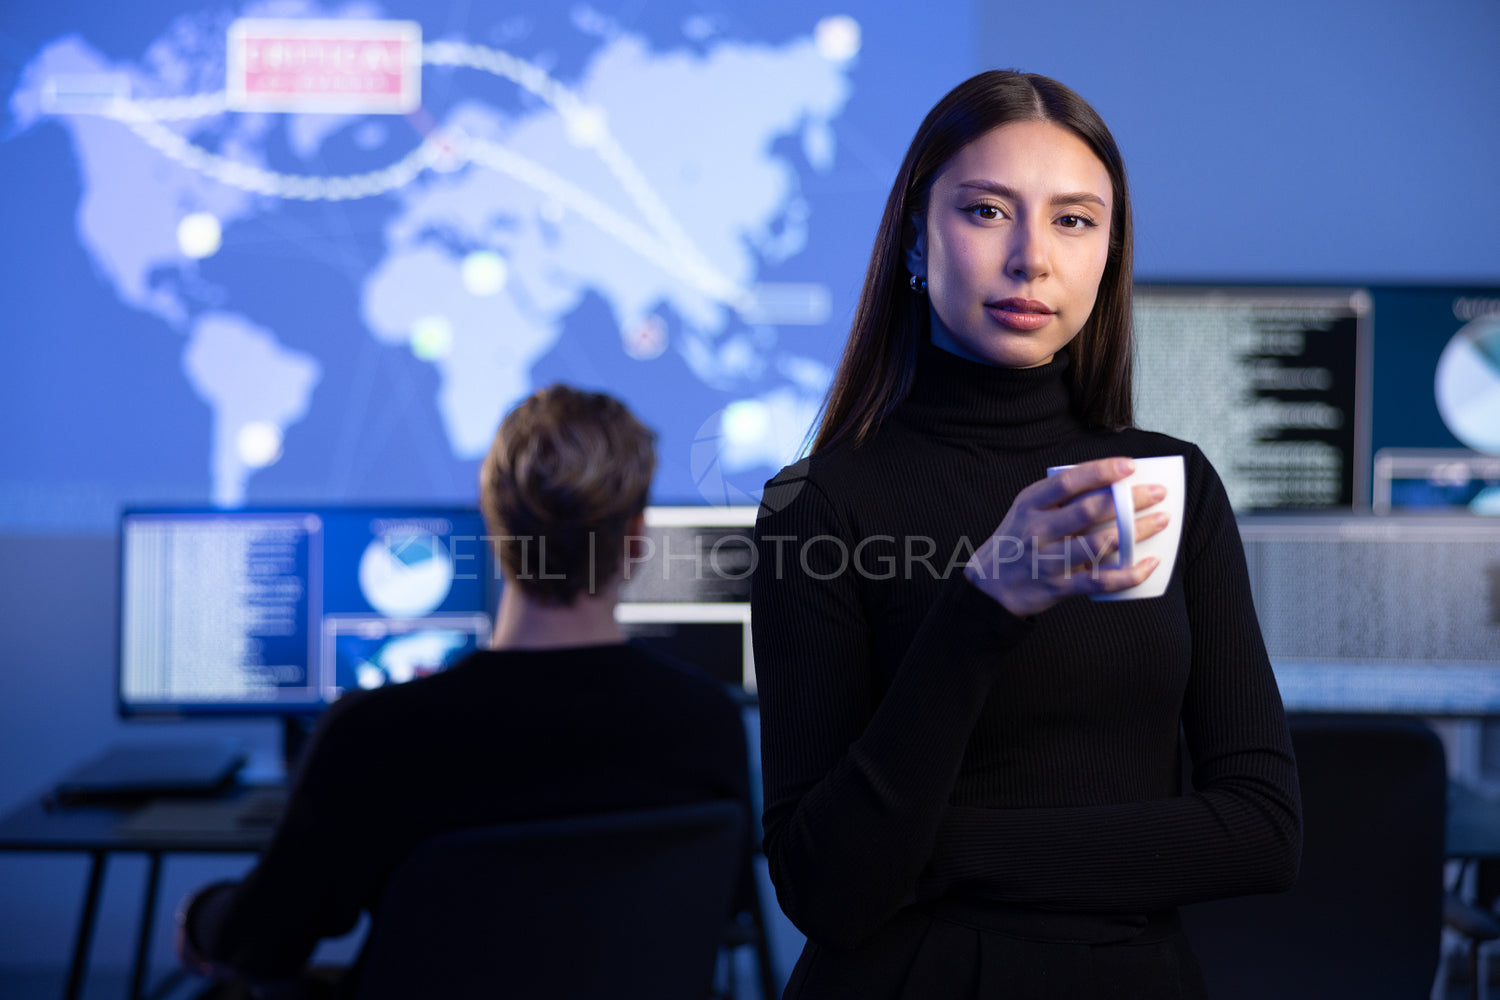 Professional Female IT Consultant holding coffee cup in large Cyber Security Operations Center SOC handling Threats